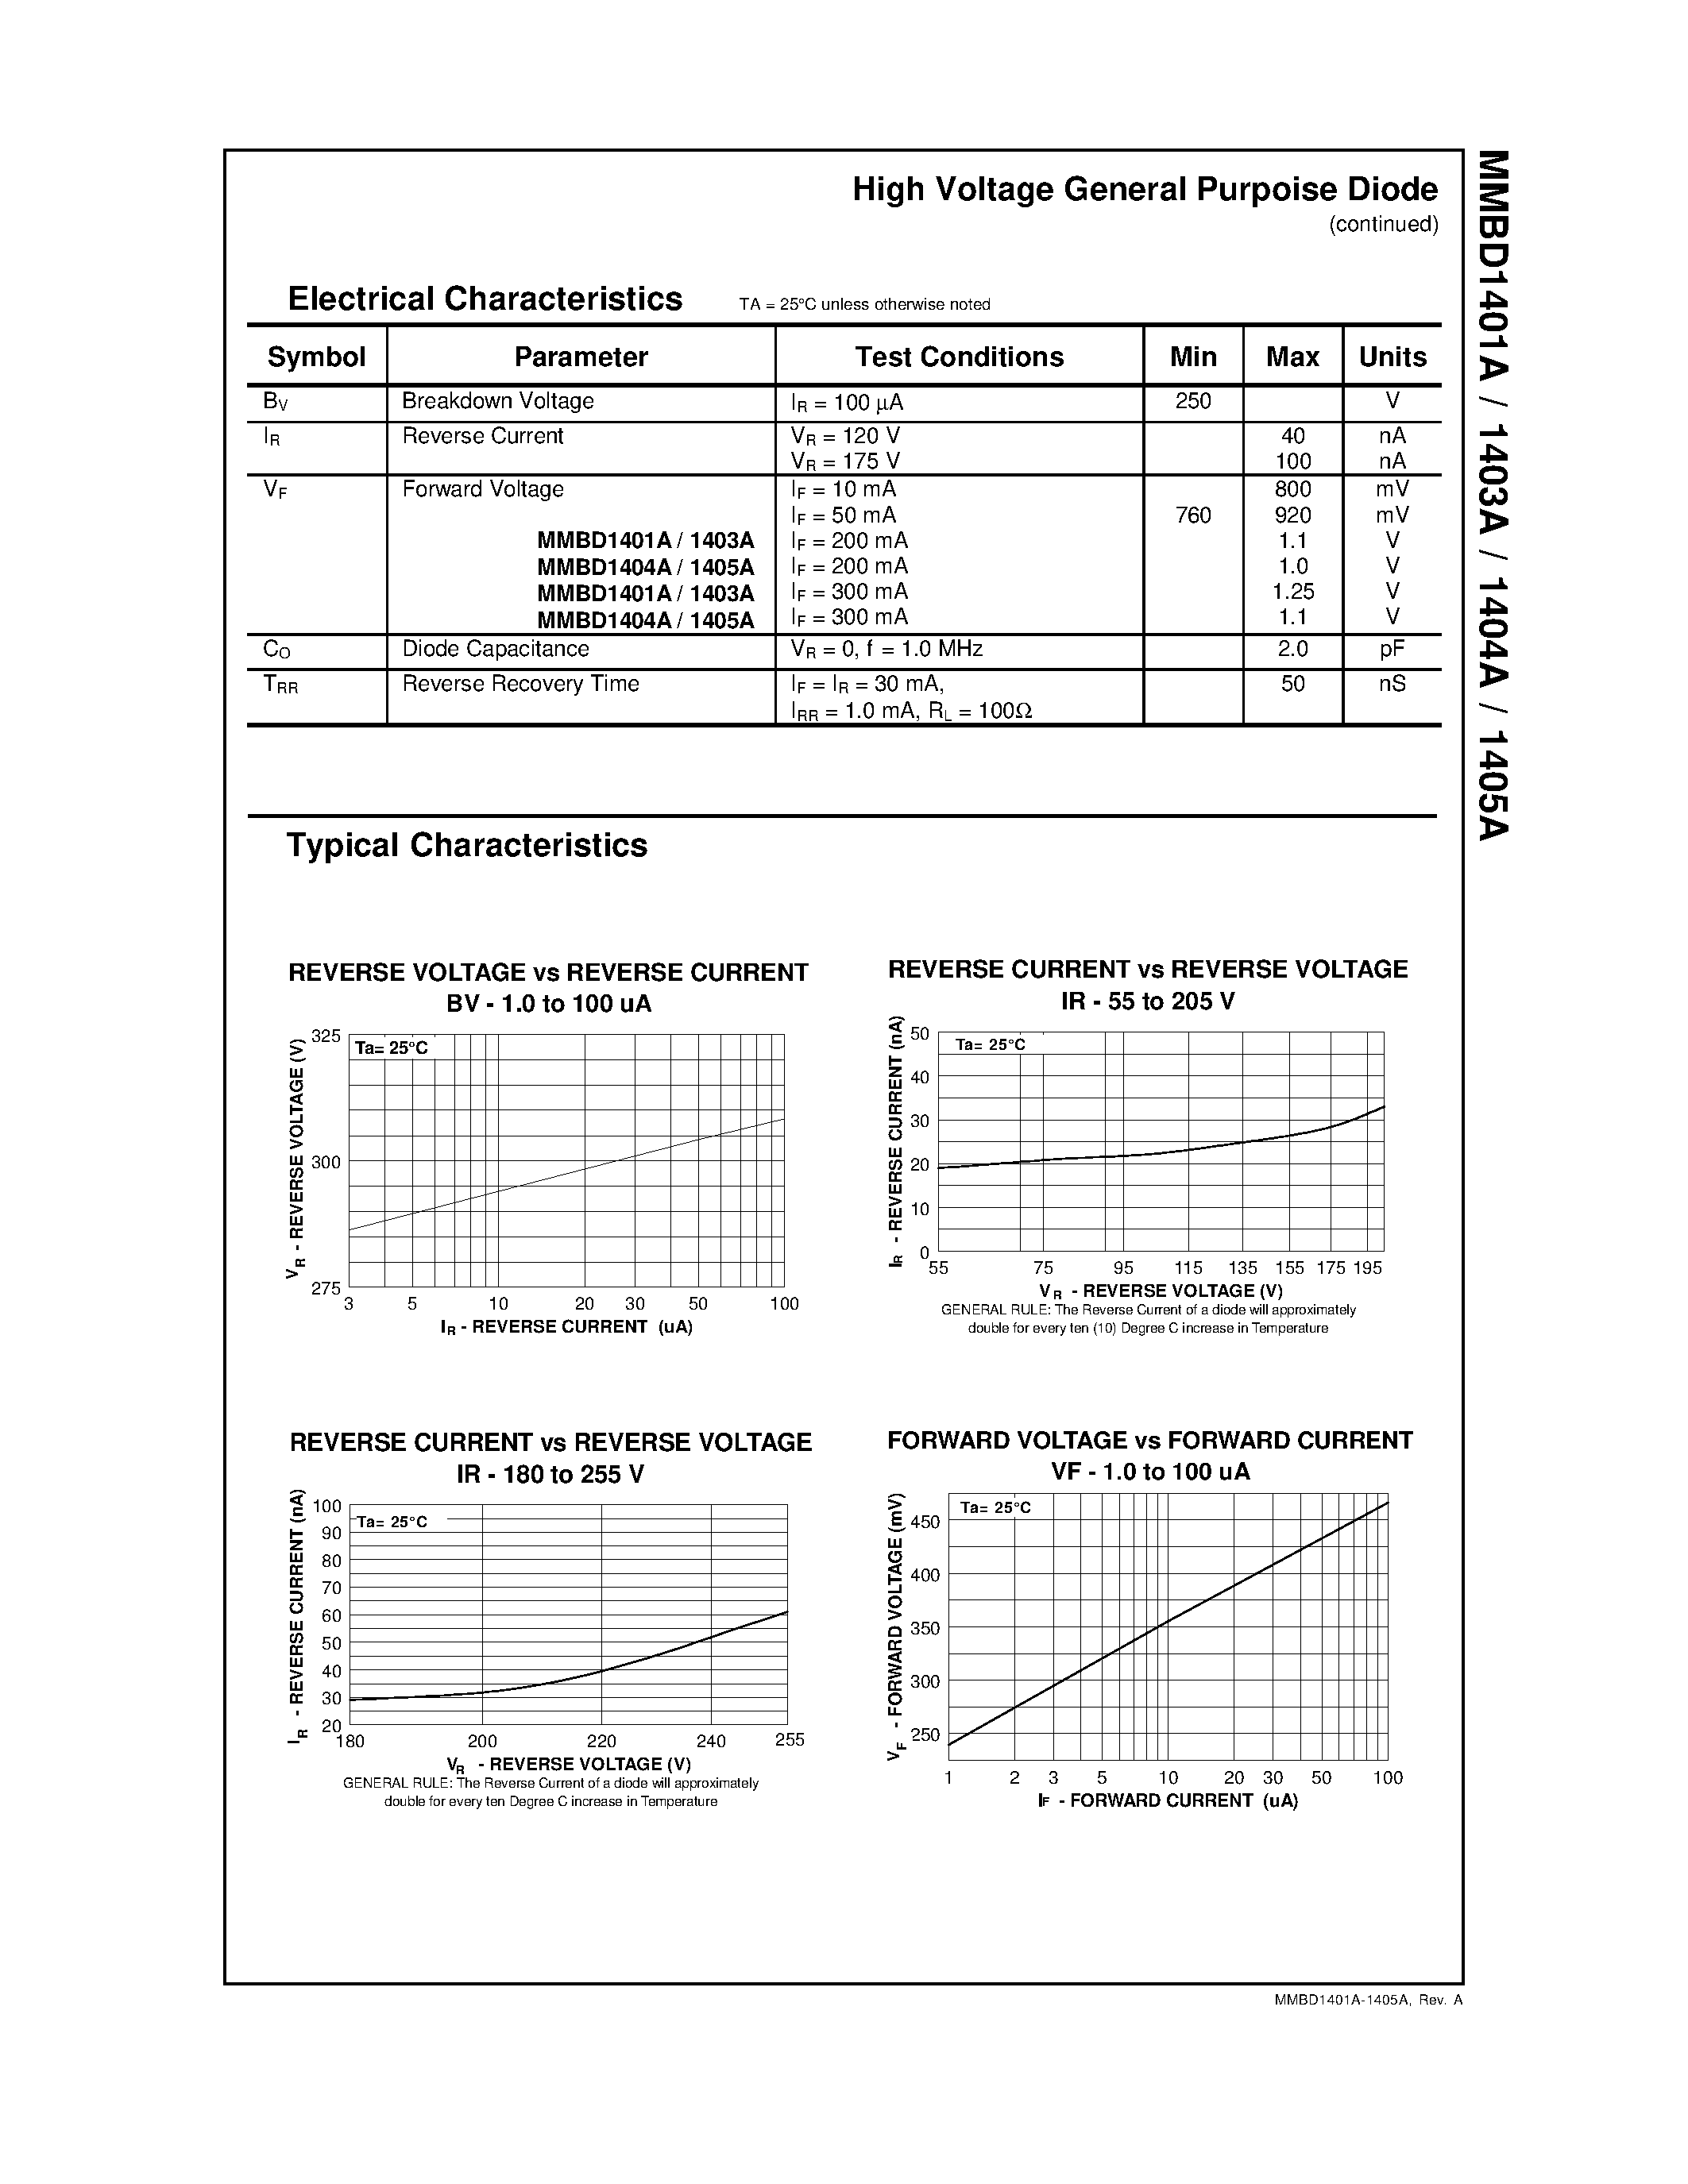 Datasheet MMBD1404A - High Voltage General Purpose Diode page 2